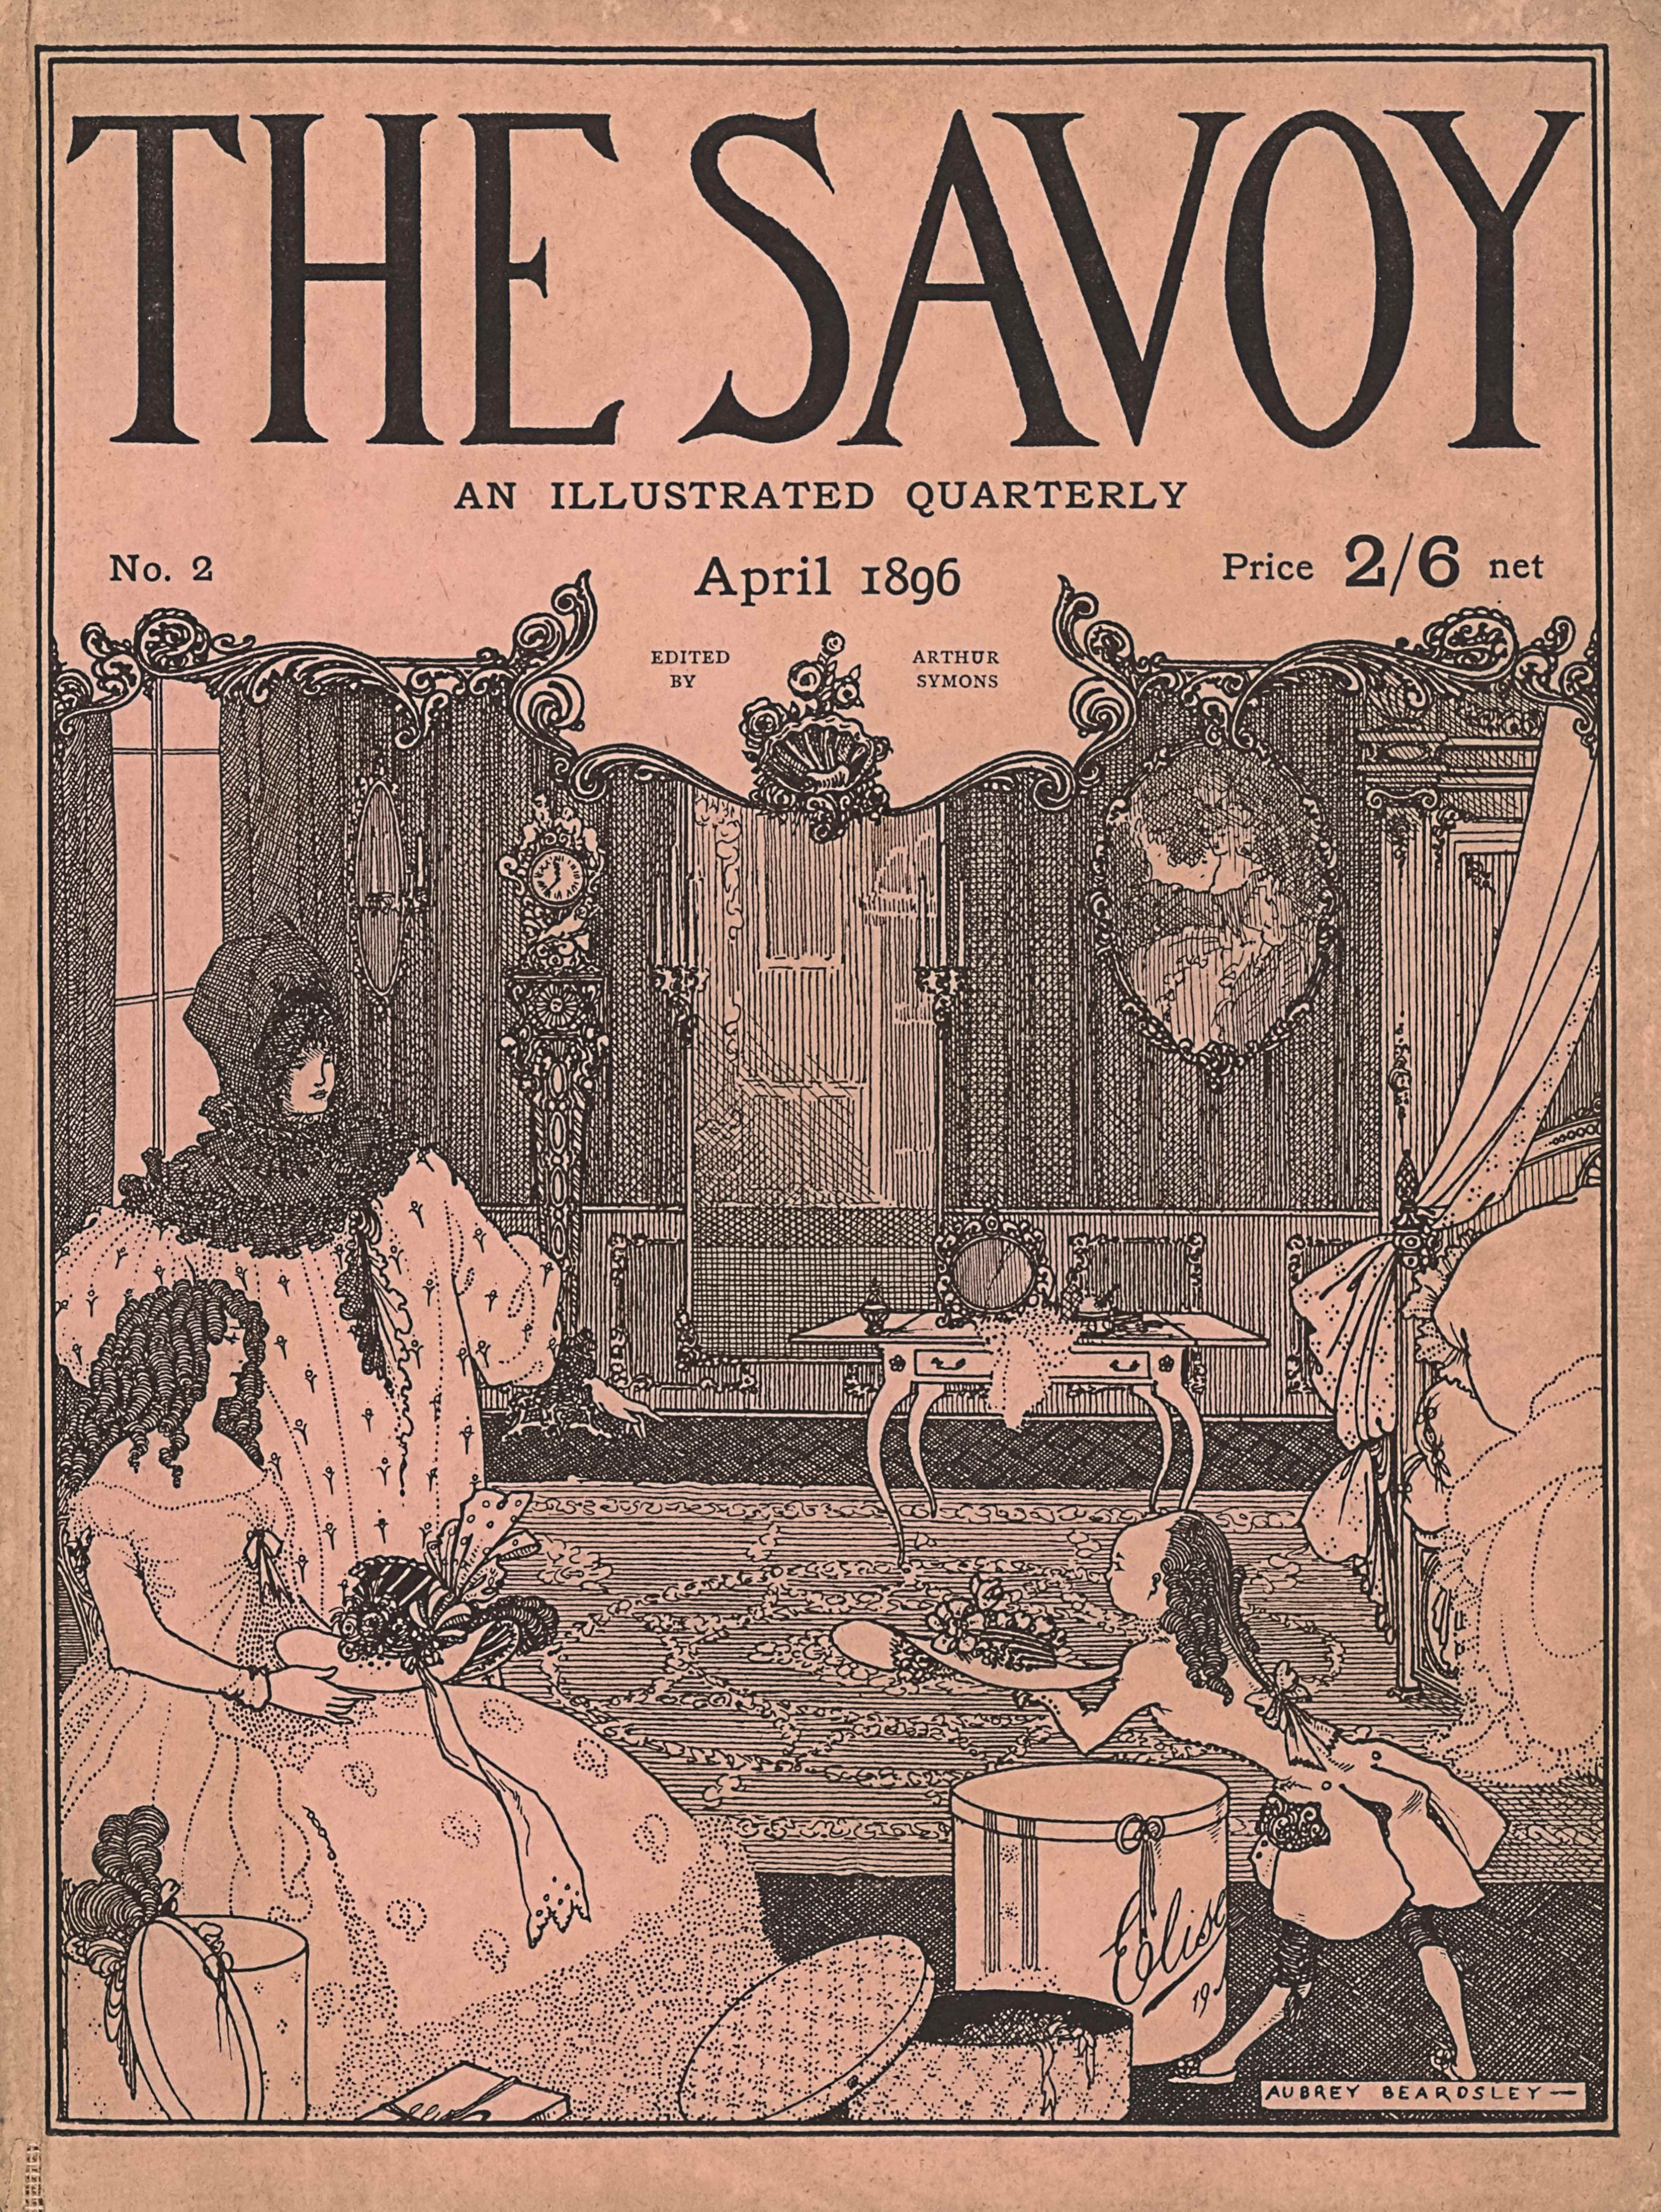 The cover image, in portrait orientation, combines a line-block reproduction of a pen-and-ink design with letterpress. The title: “THE SAVOY” [caps] appears in the top quarter of the page in large font. Underneath the title is the text: “AN ILLUSTRATED QUARTERLY” [caps], centered in small font. In the line below “No. 2” appears aligned to the left. In the same line the text: “April 1896” is centered. Right aligned in the same line is the text: “Price 2/6 net”. Below this line an ornamented curved, curlicue edge separates the publishing information from the image below. The ornamented edge dips down slightly lower in the centre with a scallop shell ornamented with floral buds sticking up in the middle. On either side of the scallop is text. On the left in two lines it reads: “EDITED BY” [caps] and on the other side of the scallop in two lines appears: “ARTHUR SYMONS” [caps]. The image below the text block is of two women in a bedroom selecting a hat to wear with a small page aiding them. In the foreground and the bottom left of the page is an open hat box with a plume of feathers sticking out the top and hanging over the left side. The lid of the hat box leans against the front. To the right is a square box lid partially visible in the foreground. To the right of that and centrally in the foreground is a shorter and wider hat box opened with the lid leaning on the top edge and the floor and revealing the top edge of a hat with ribbons hanging out over the edge. Slightly behind the central hat box is a larger hat box closed and with the text: “Elise” scrawled across the front and around the right side. The box also has a bow on the front edge. The page leans forward over top of the “Elise” hat box, in profile facing the women at the left of the page. The page is holding a large brimmed hat with floral decorations around the crown and offering it to the women. The page wears a double vent tailcoat reaching down to the knee. The coat features a bow on the lower back. The page has a bald area on the top of the head and coiled hair that starts at the back of the scalp and hangs down below the shoulders. The page’s face is visible in profile. On the left, behind the hat box, a woman sits on a chair facing to the right of the page. Her face is visible in profile. She wears a long gown that has a wide, off-the-shoulder neckline. The dress has a swirl dotted pattern embroidered into it. There is heavy swirling at the bottom of the skirt. A bow is tied in the centre of her bust. She has long, dark, and coiled hair. Her arms are bent and holding a ornamented hat on her lap. The hat is large brimmed and has a striped pattern on the crown only. There are bows and twirls of ribbon around the band. One long end of a ribbon hangs down her lap. Behind the seated woman is a standing woman, also facing to the right side of the page. Her face is in three-quarters profile. She has on a large nightgown with a small floral pattern and vertical dotted lines. She also has on a large bonnet, which covers her hair and neck. The bonnet has ruffled edges and like a scarf has a piece that hangs down her front. She has her right hand on her hip and her left hand extended out and pointed down. The floor of the room is a diamond pattern parquet with a large floral garland patterned rug over top. Behind the women on the left is a large paned window with drapes. An oval mirror is hung on the wall just past the window towards the back wall. The mirror has a candle holder extending out from either side. On the back wall to the right of the mirror is a tall and ornamented grandfather clock. The wall has vertical striped dark wallpaper with square panelling in the bottom quarter. In the middle of the back wall is a floor-length mirror, again with candle holders and two candles on each side mid-way up. In the mid-ground and slightly to the right is a dressing room table topped with a small mirror, perfume bottle, piece of clothing, and small brushes. The table has rounded legs convexing outwards and one drawer in the front. Behind the table on the wall is a portrait of a woman in an oval frame, dressed in a gown and a plumed hat. To the right of the frame, and from the mid-ground to the back wall, sits a bed only one-quarter in the frame, showing an ornamented headboard and footboard with a bench in front piled high with pillows and blankets. The bed seems to have an upper frame with bed curtains, pulled off to the side. In the bottom right corner of the page the artist’s name, printed within a white box “AUBREY BEARDSLEY –” [caps].